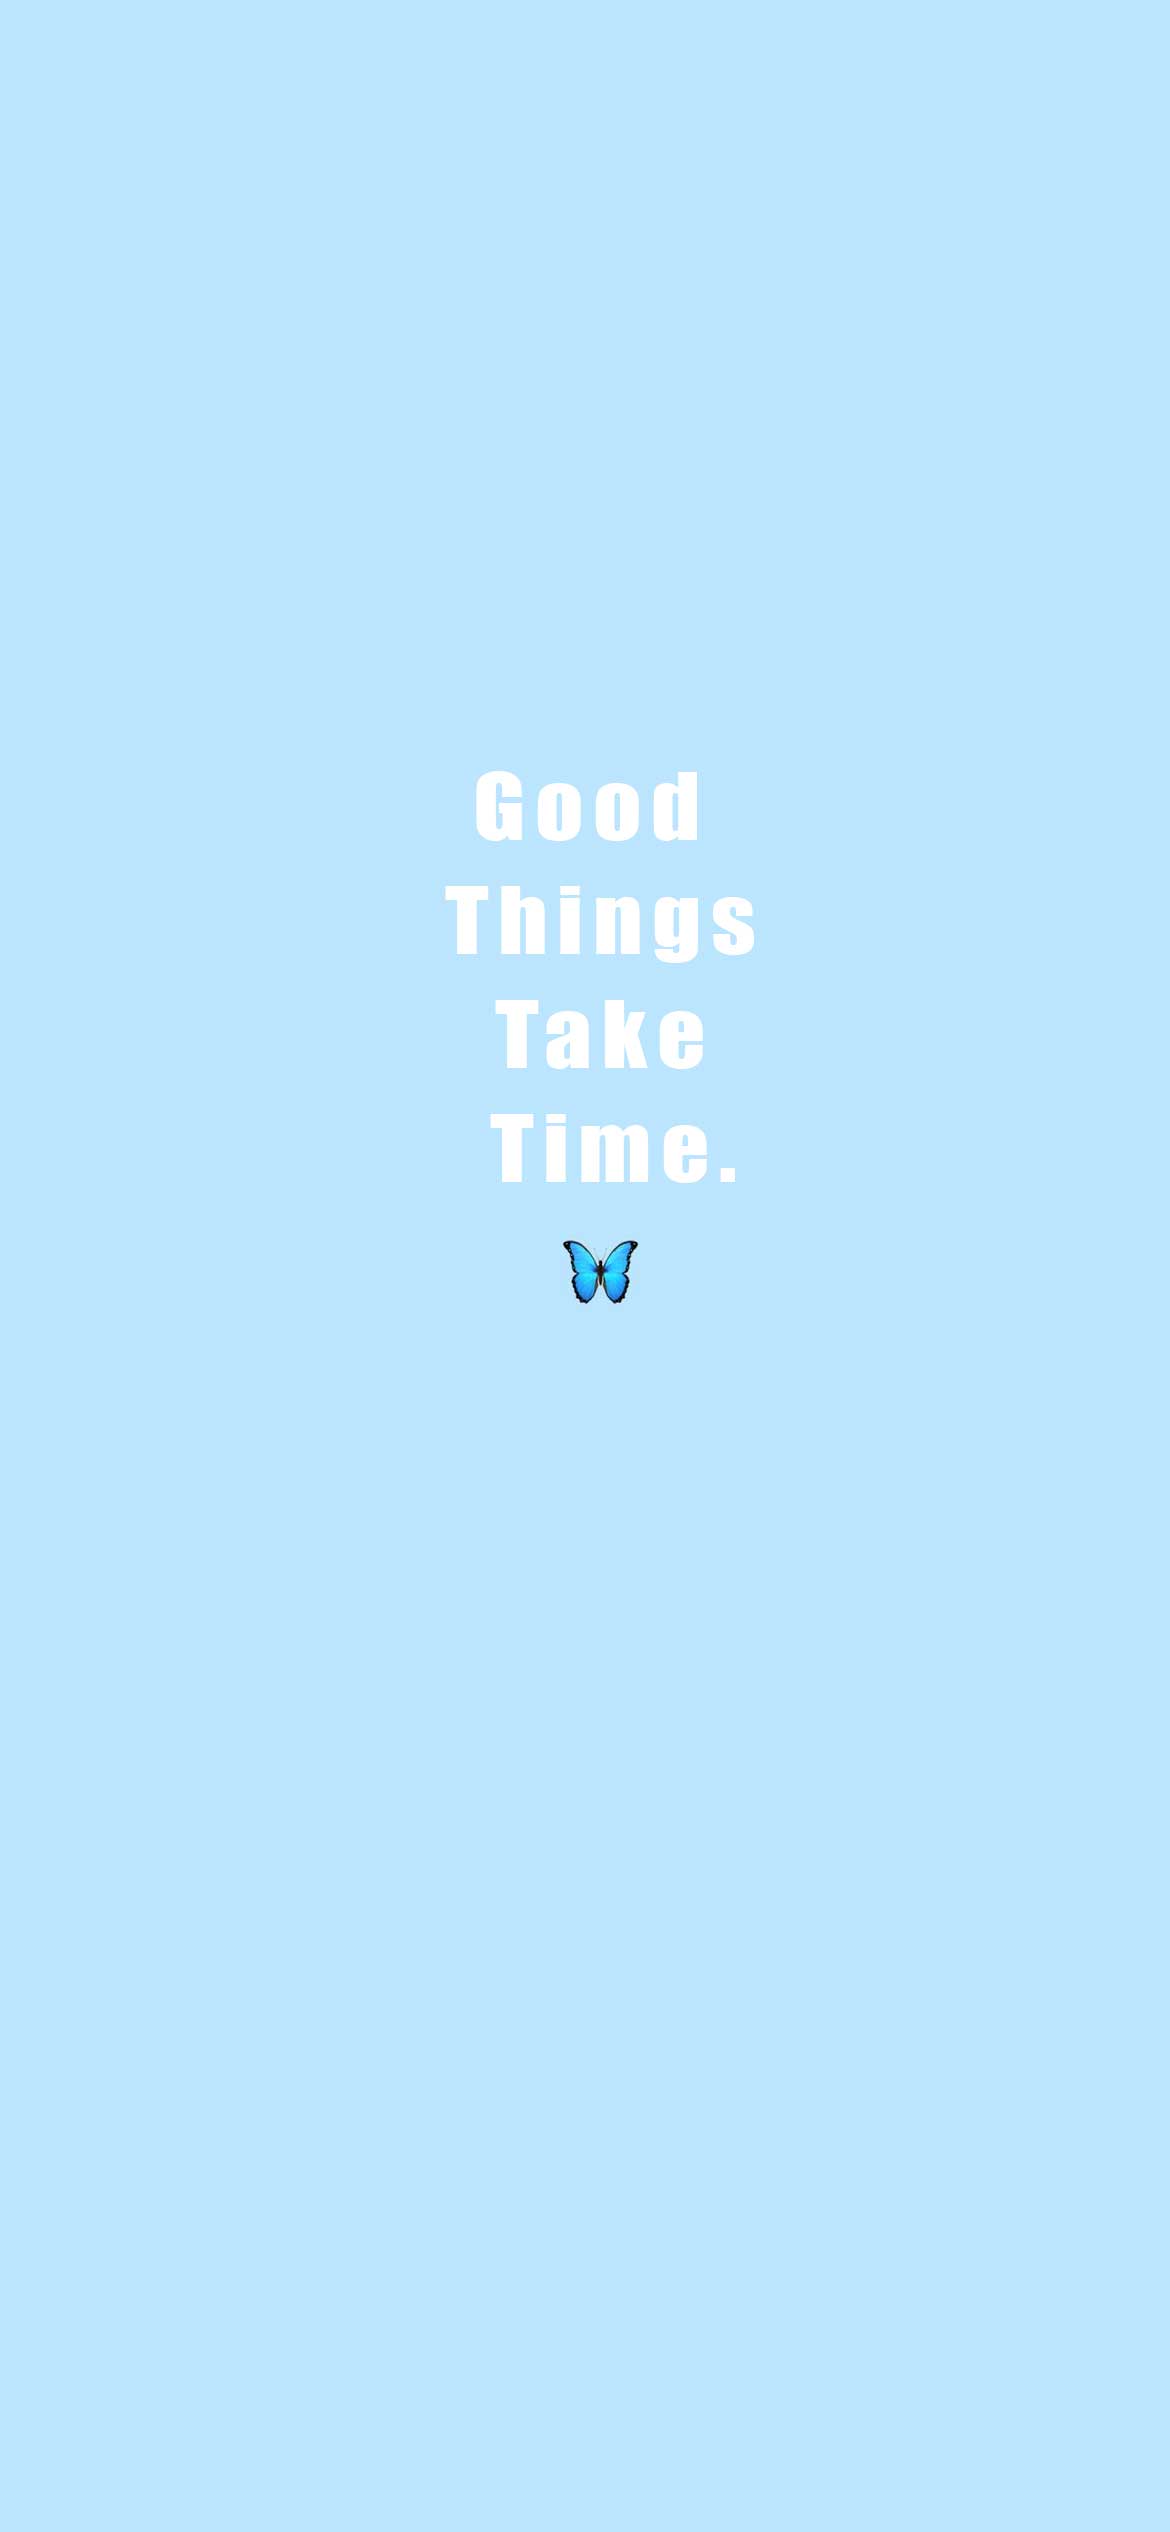 Good Things Take Time Images  Free Photos PNG Stickers Wallpapers   Backgrounds  rawpixel